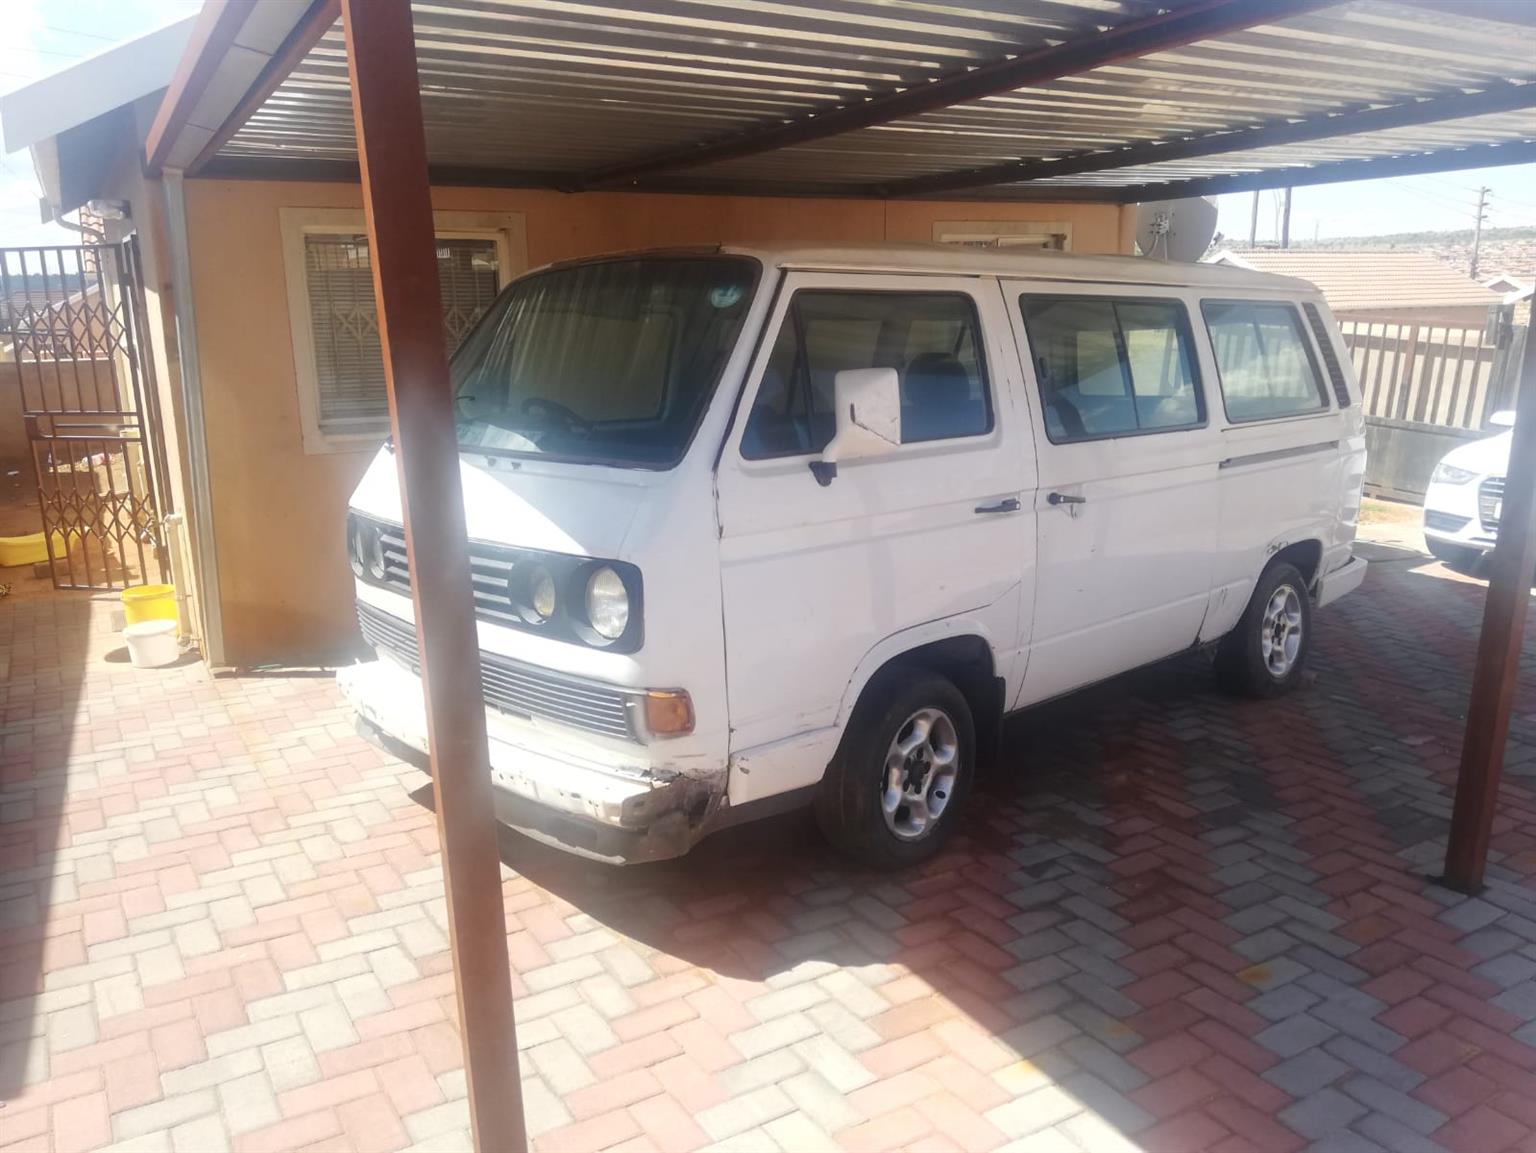 Microbus for sale, 1996 model, white, good condition 